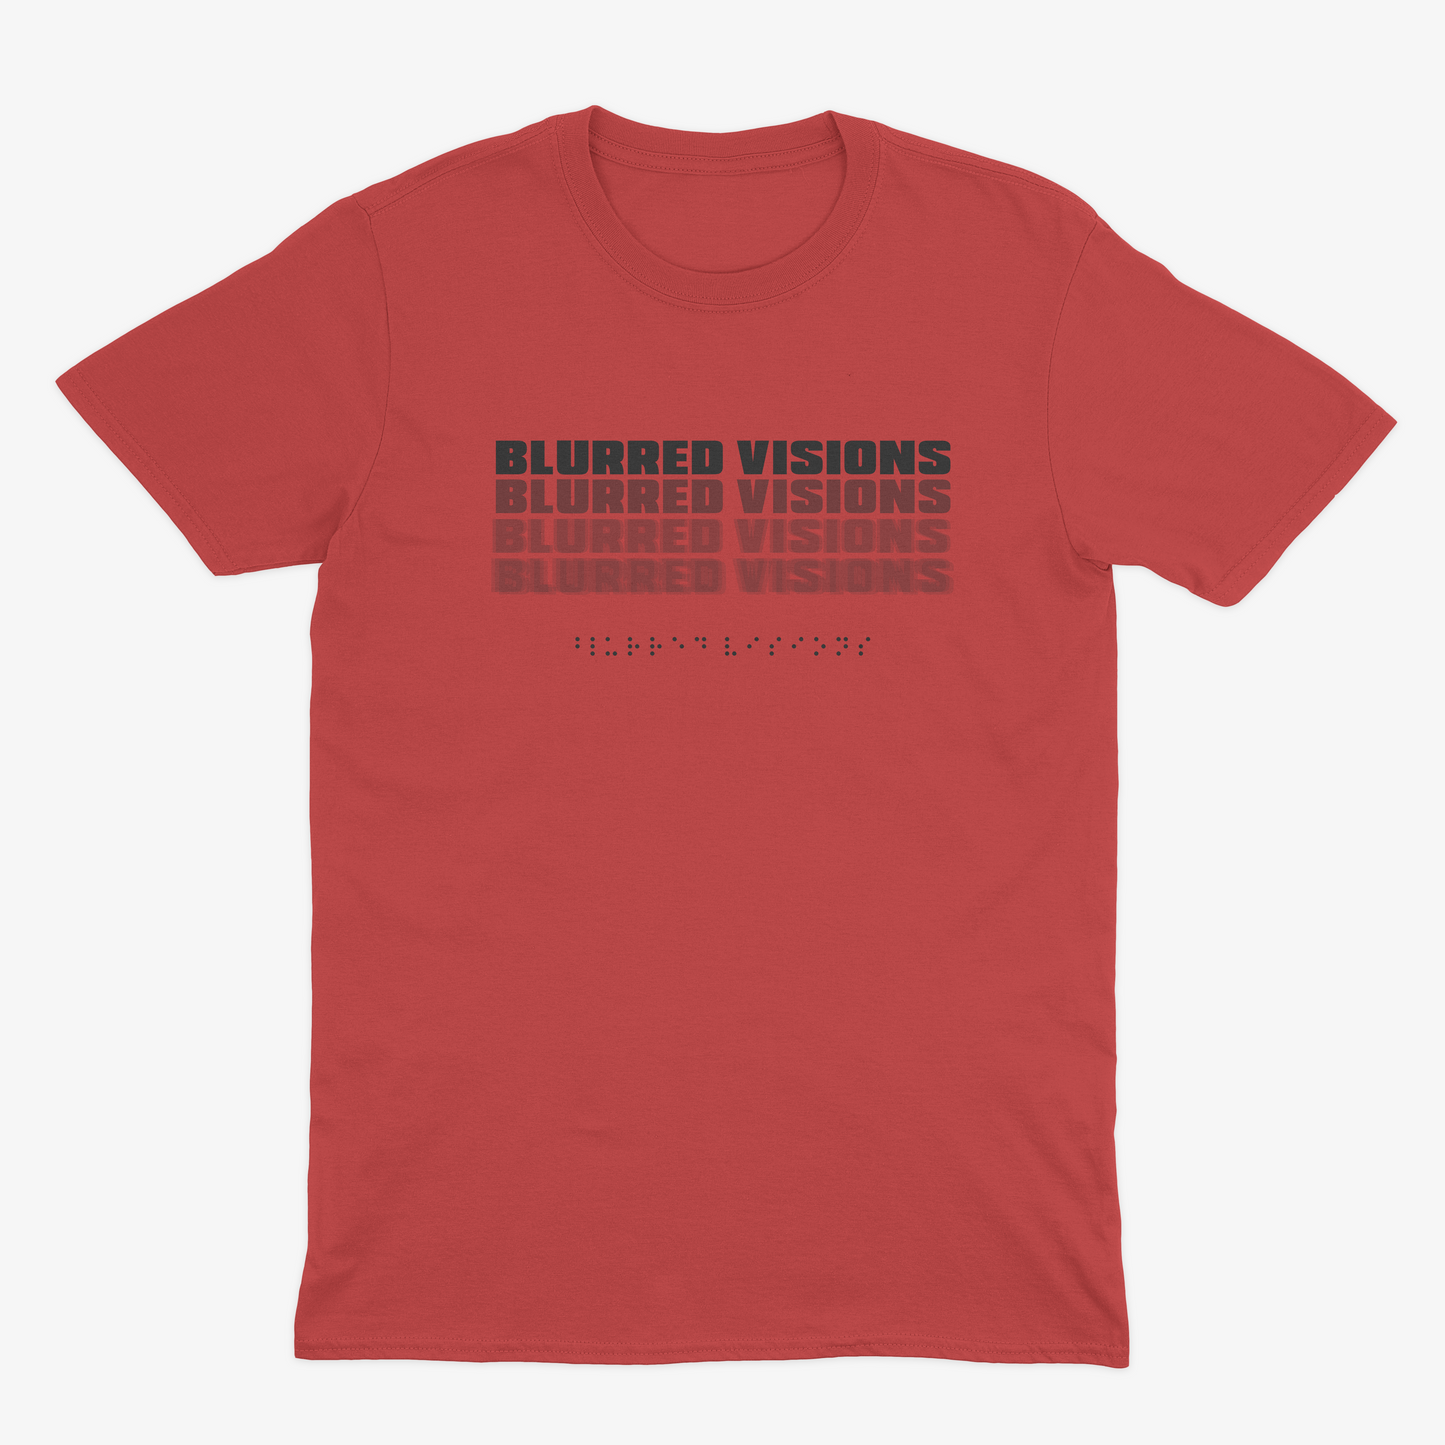 Blurred Visions - Limited Edition Adult Tee